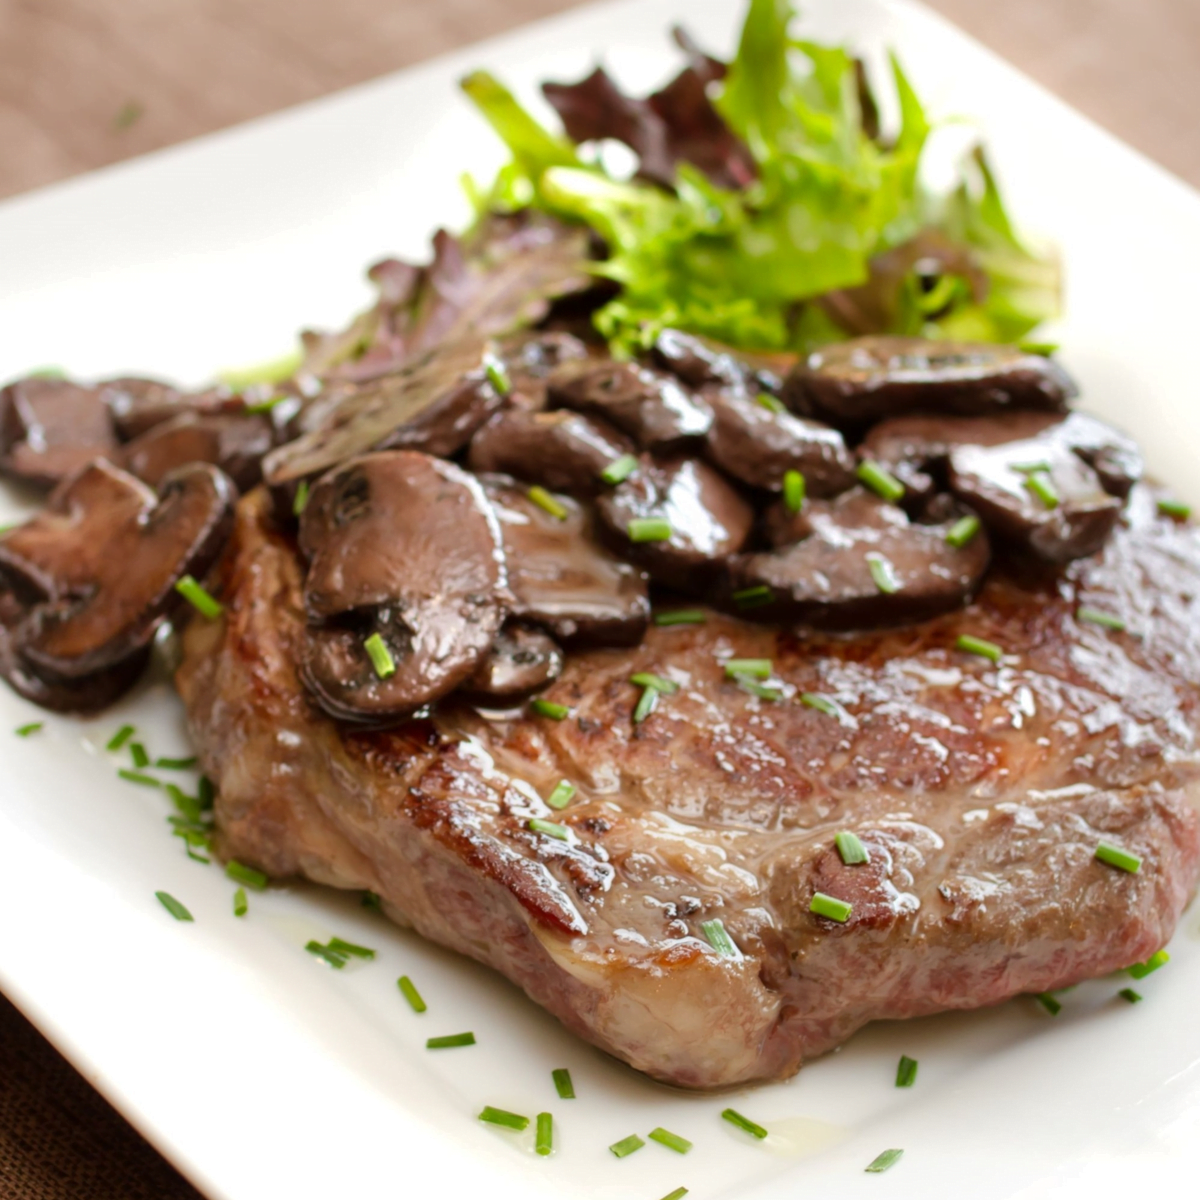 md diet approved truffle steak with mushrooms